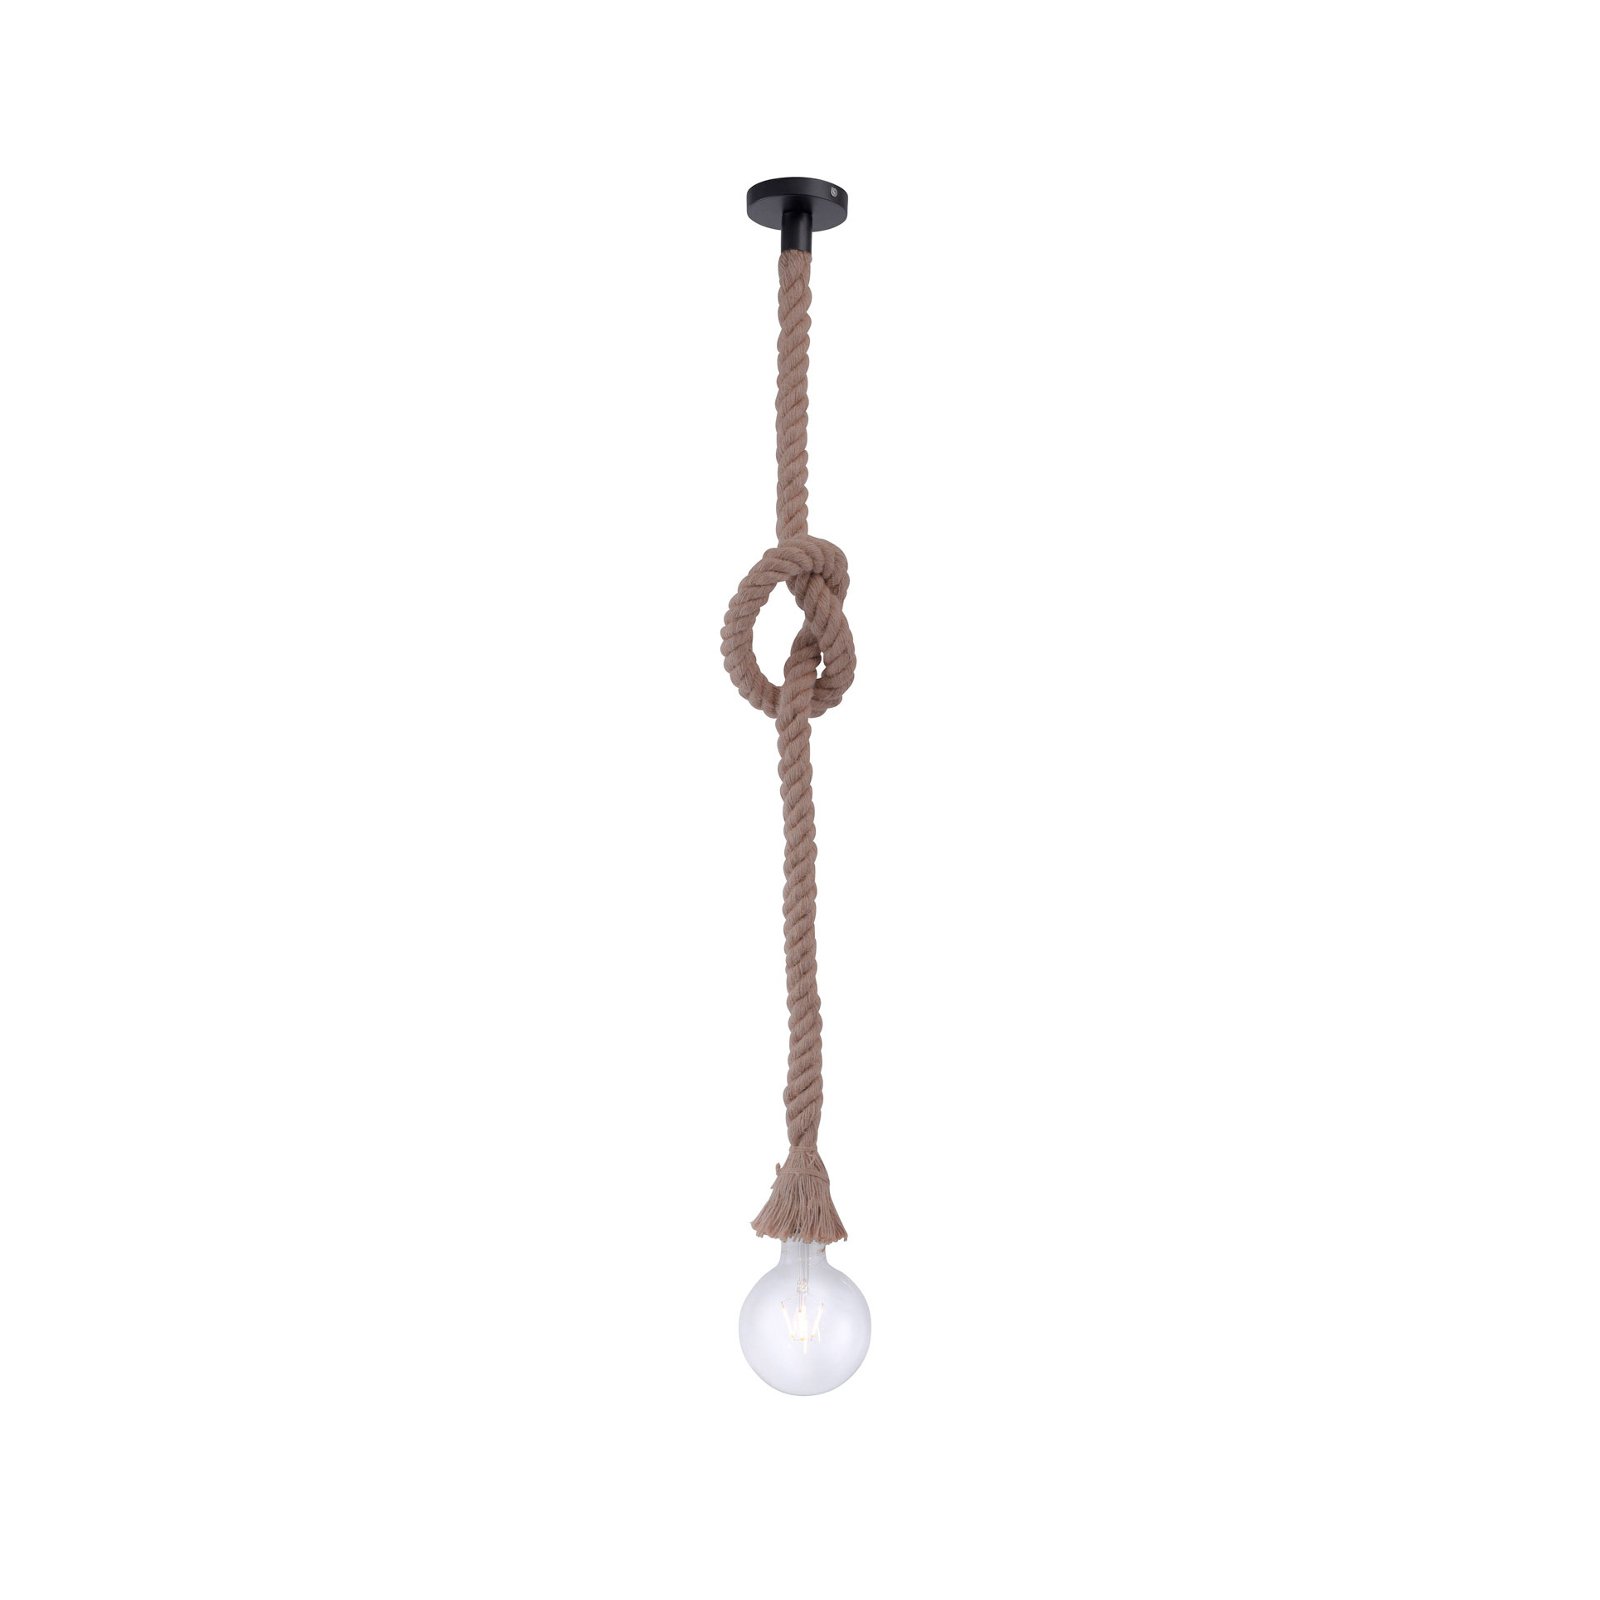 Rope pendant light with rope, one-bulb